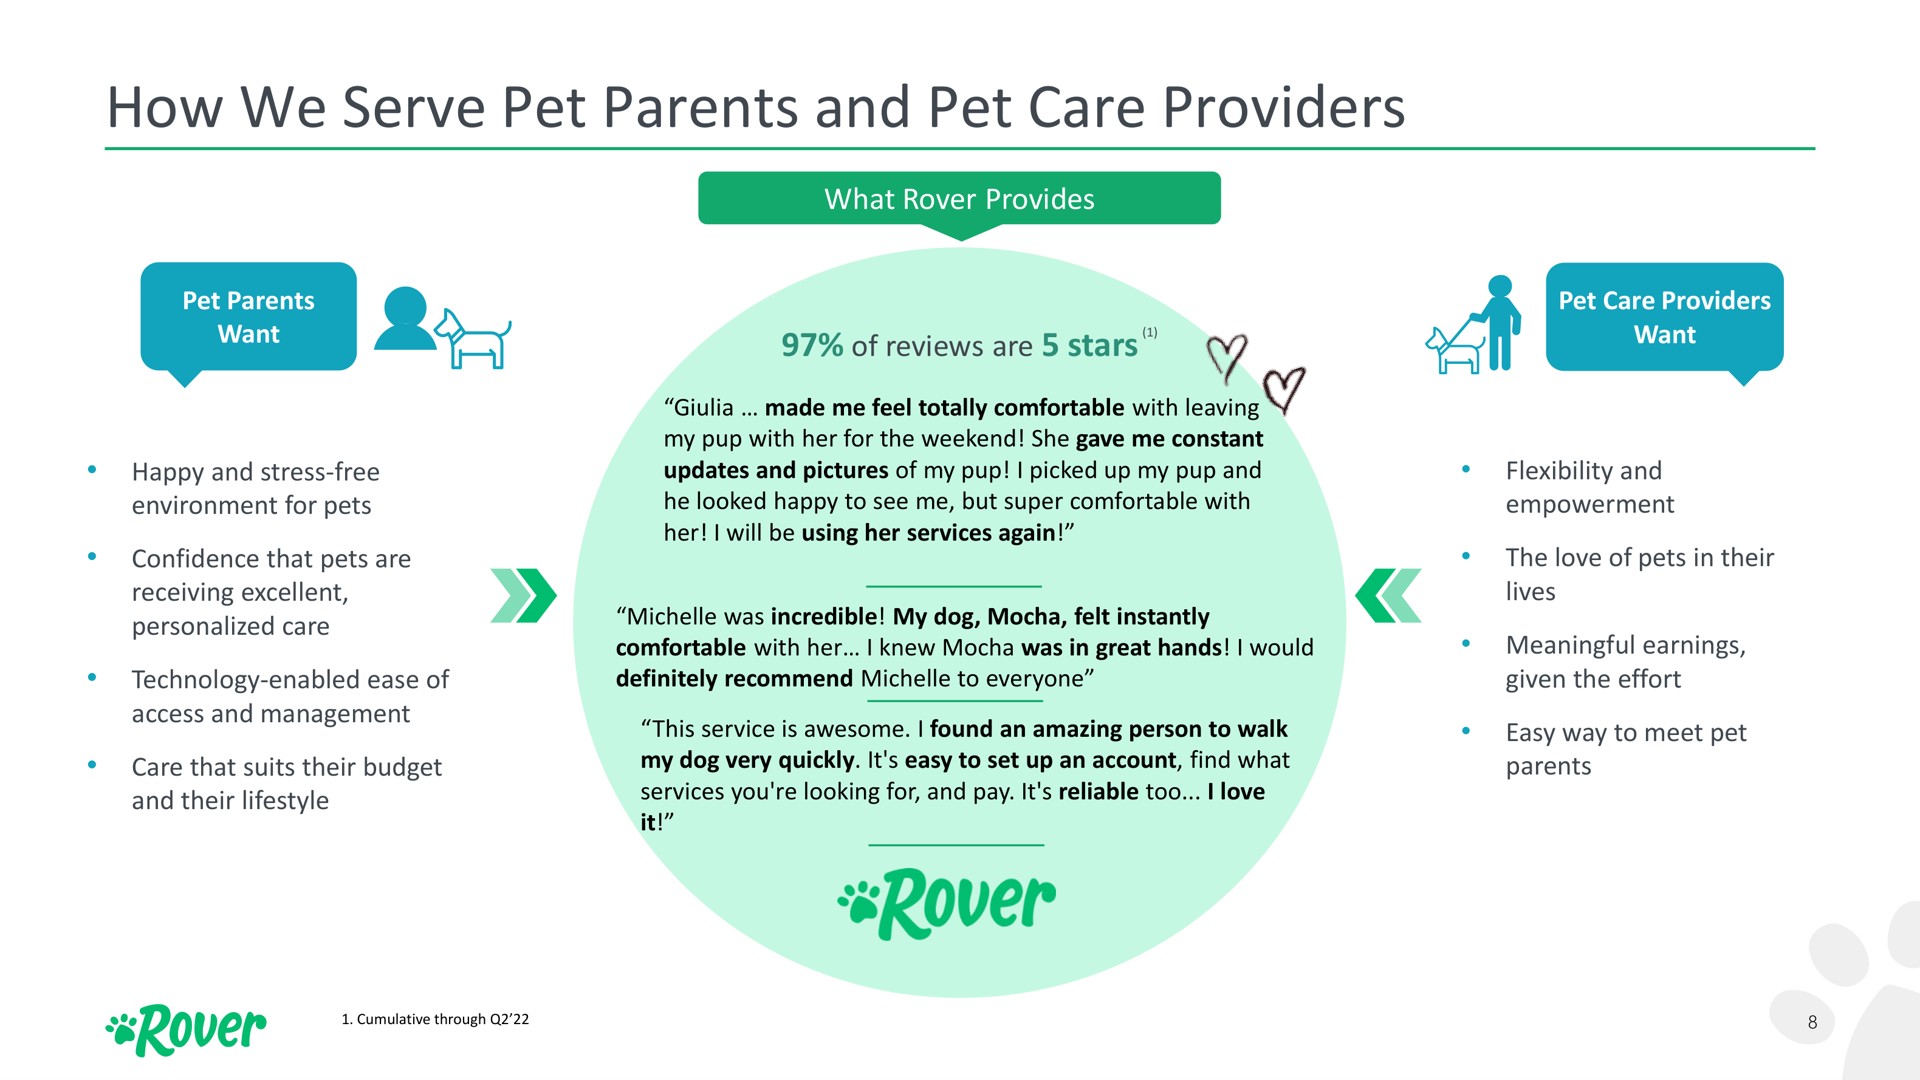 how we serve pet parents and pet care providers rover rover | Rover